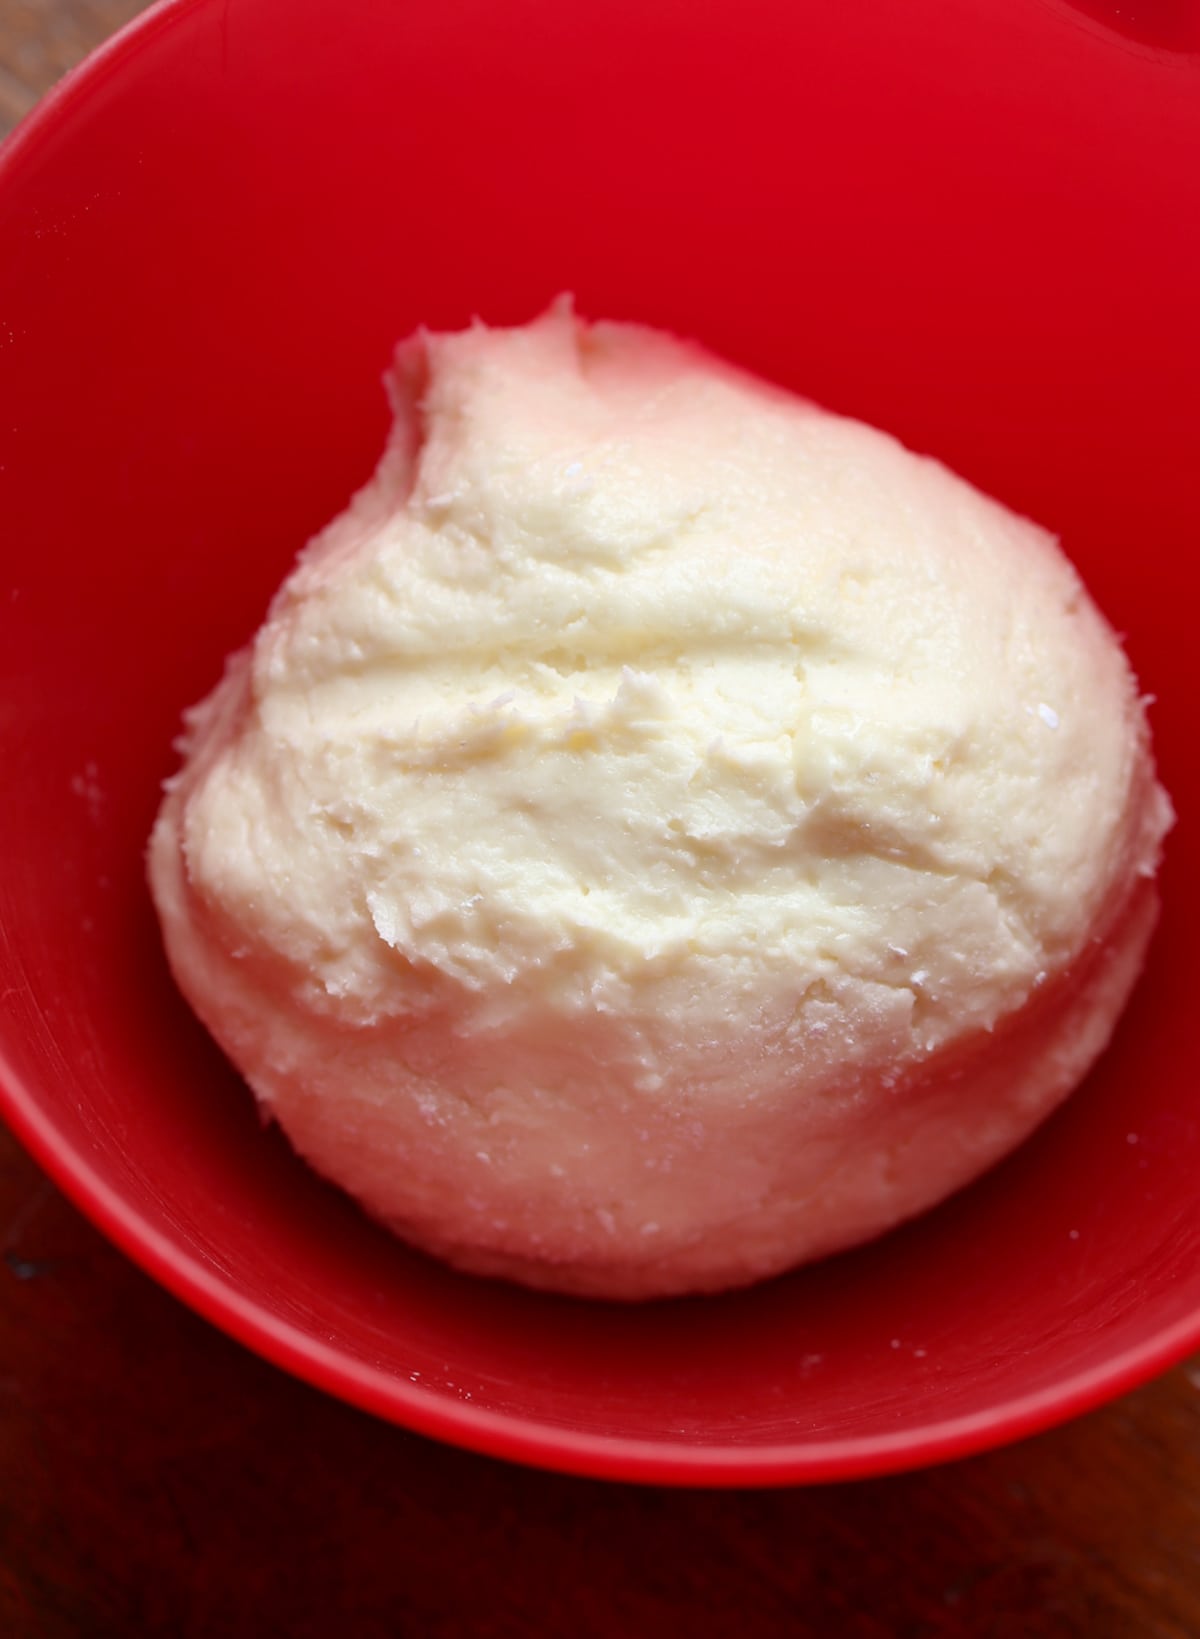 A mound of white fondant in a red bowl